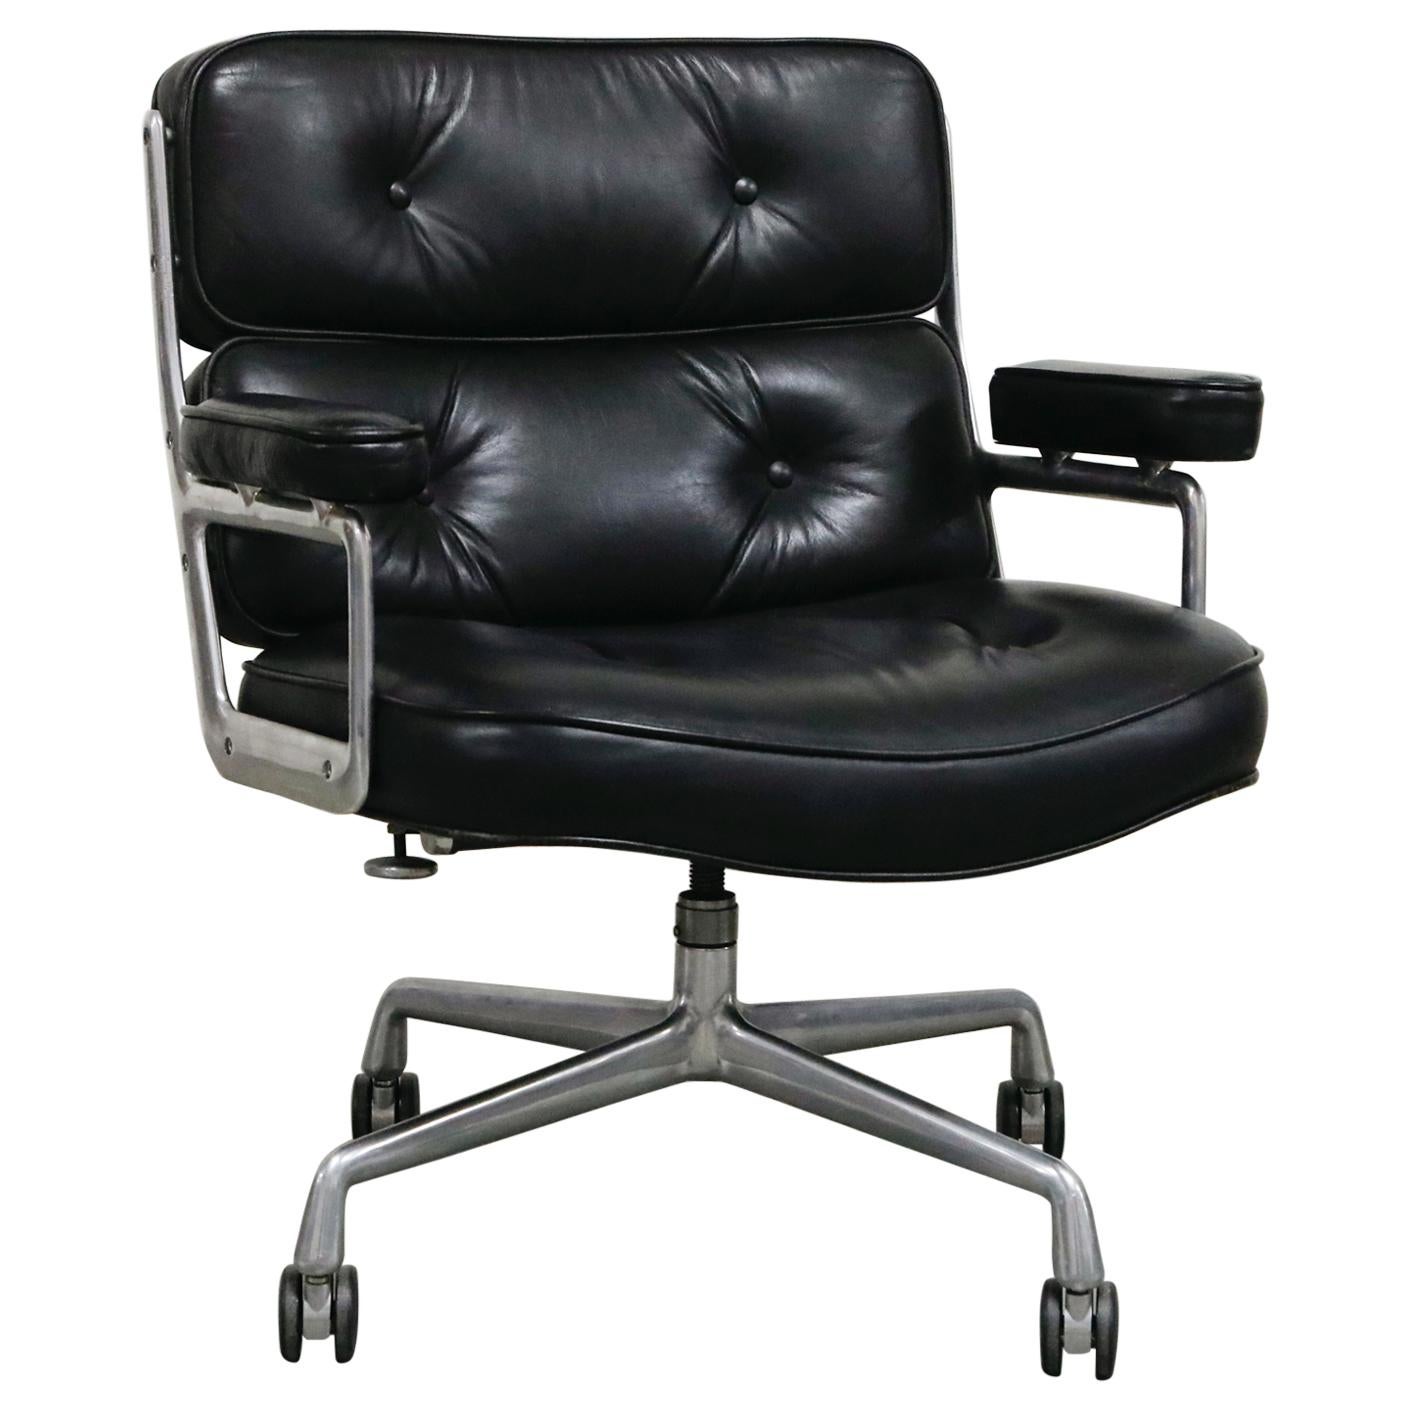 Time Life Lobby Executive Desk Chair by Charles Eames for Herman Miller, 1984